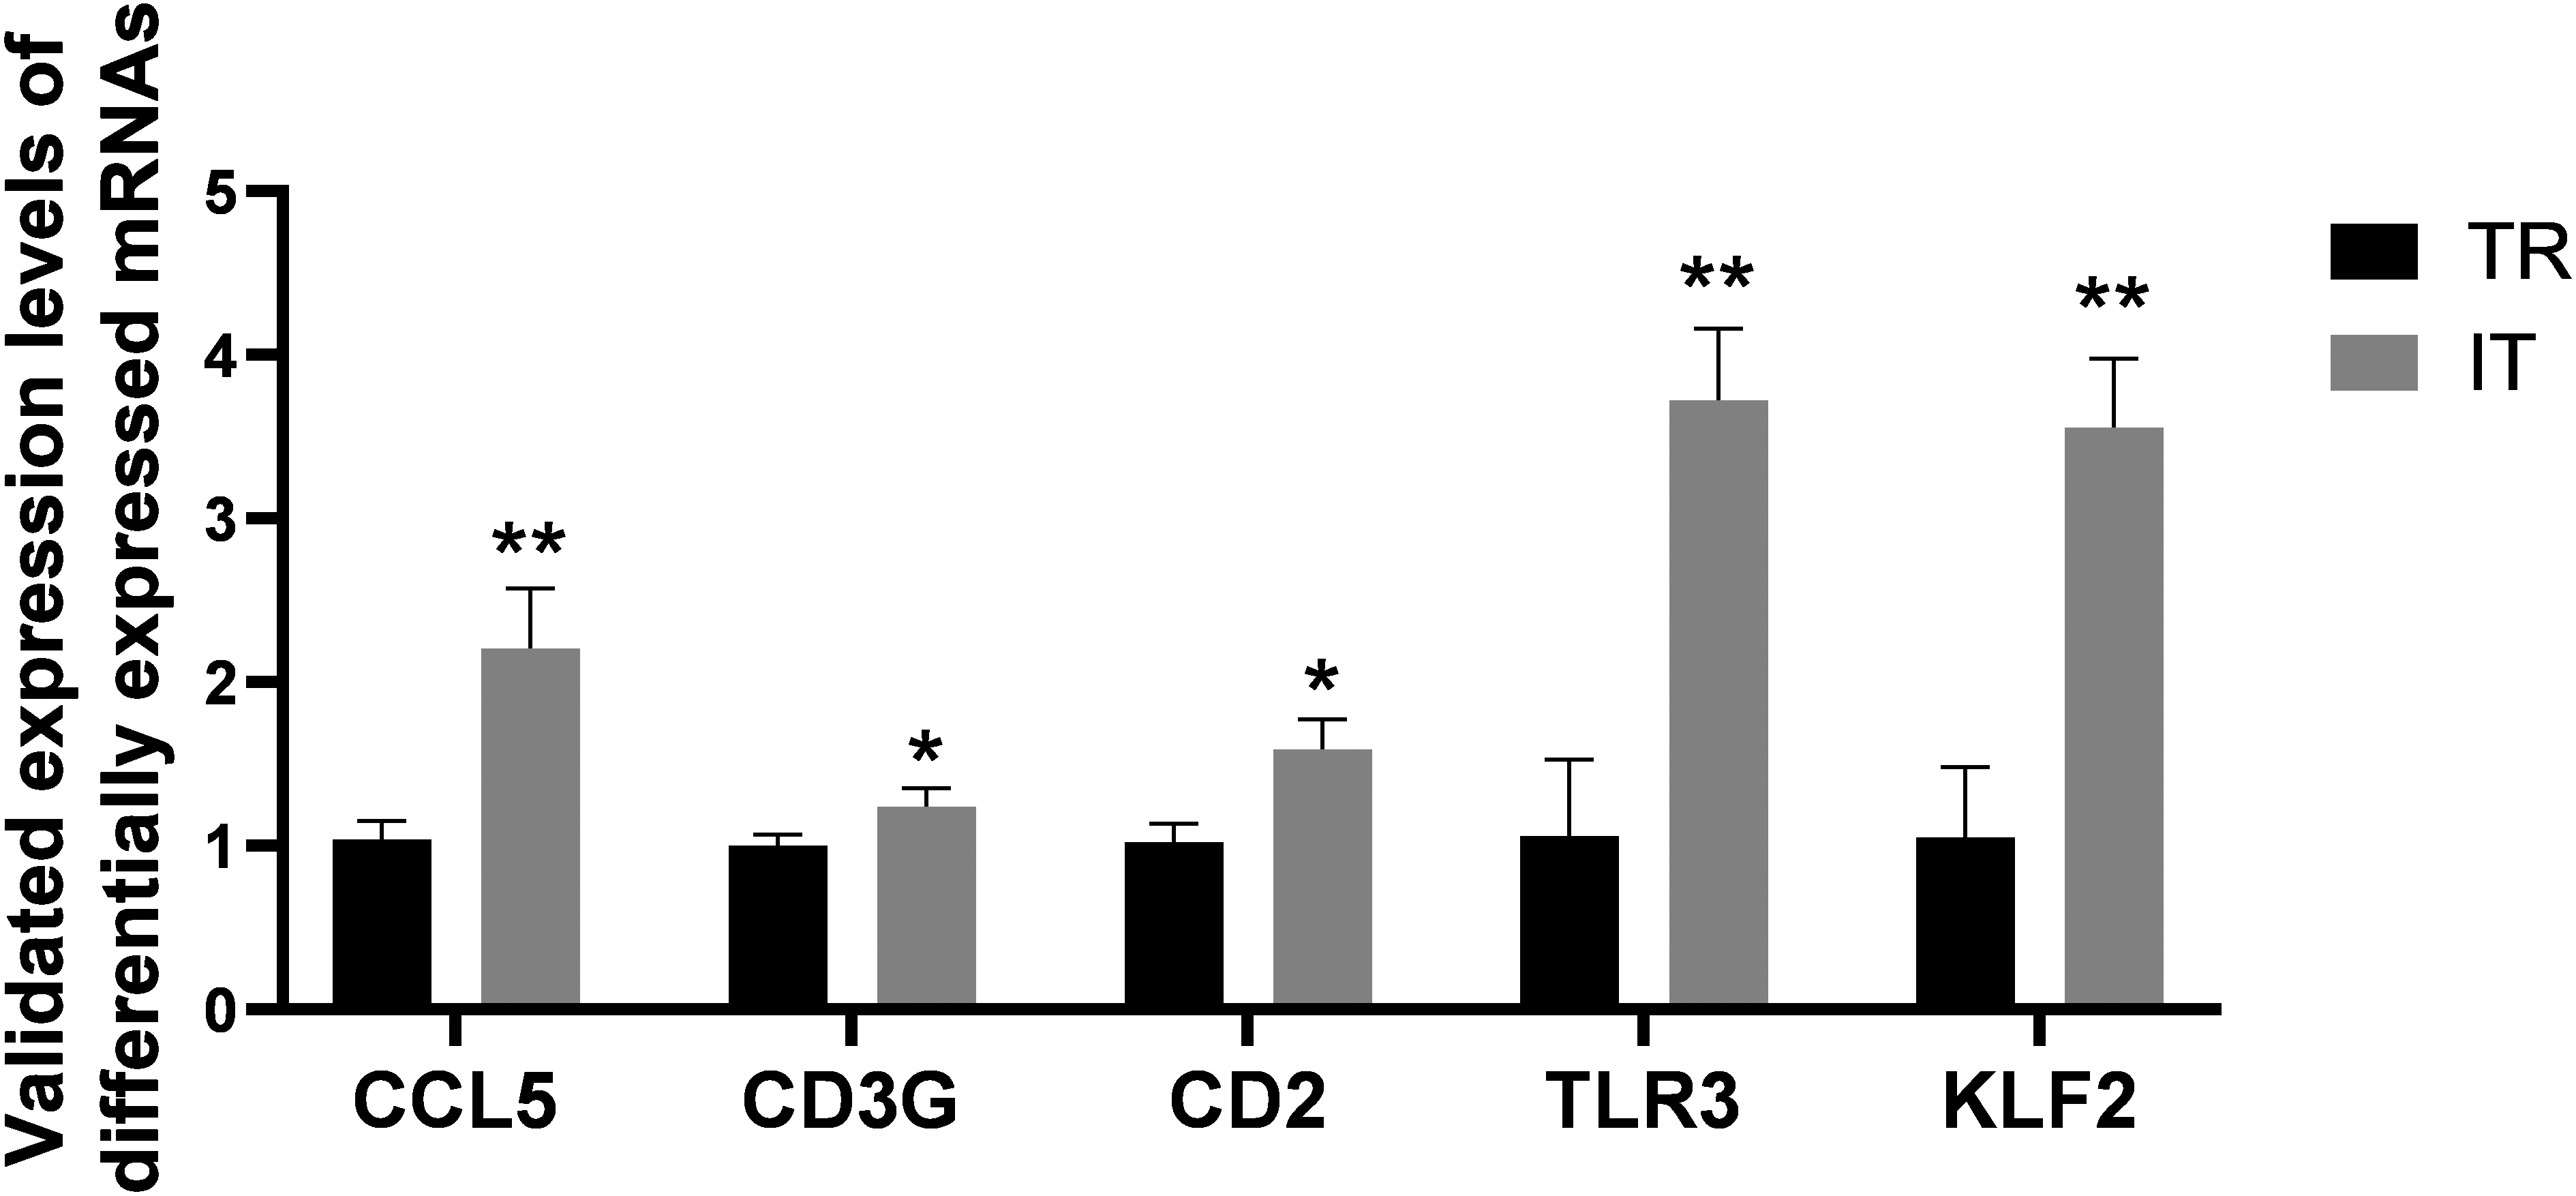 Validation of genes in FAP TR and IT tissues, including CCL5, CD3G, CD2, TLR3 and KLF2.